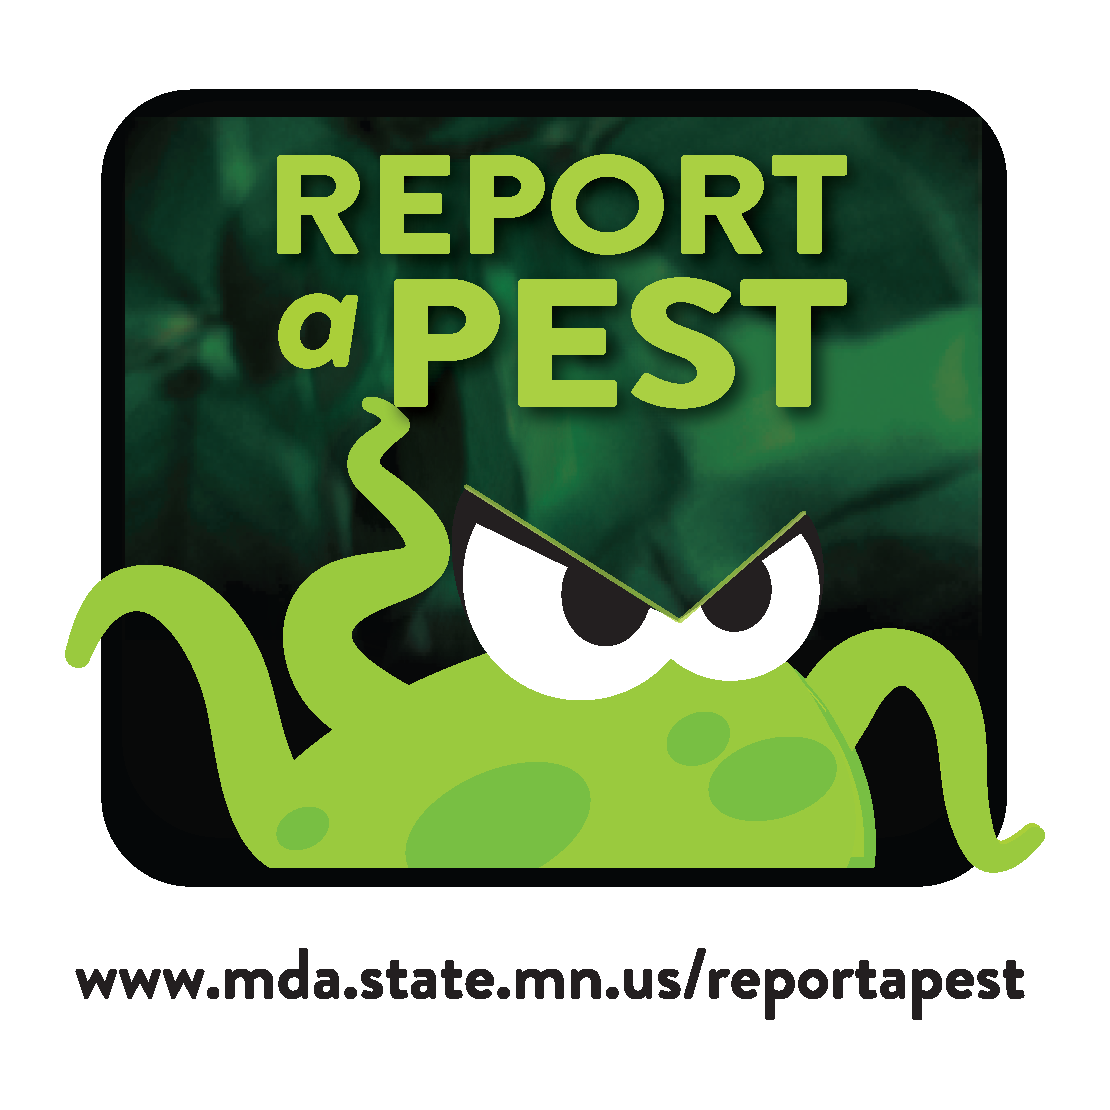 Contact to report sightings arrest.the.pest@state.mn.us 